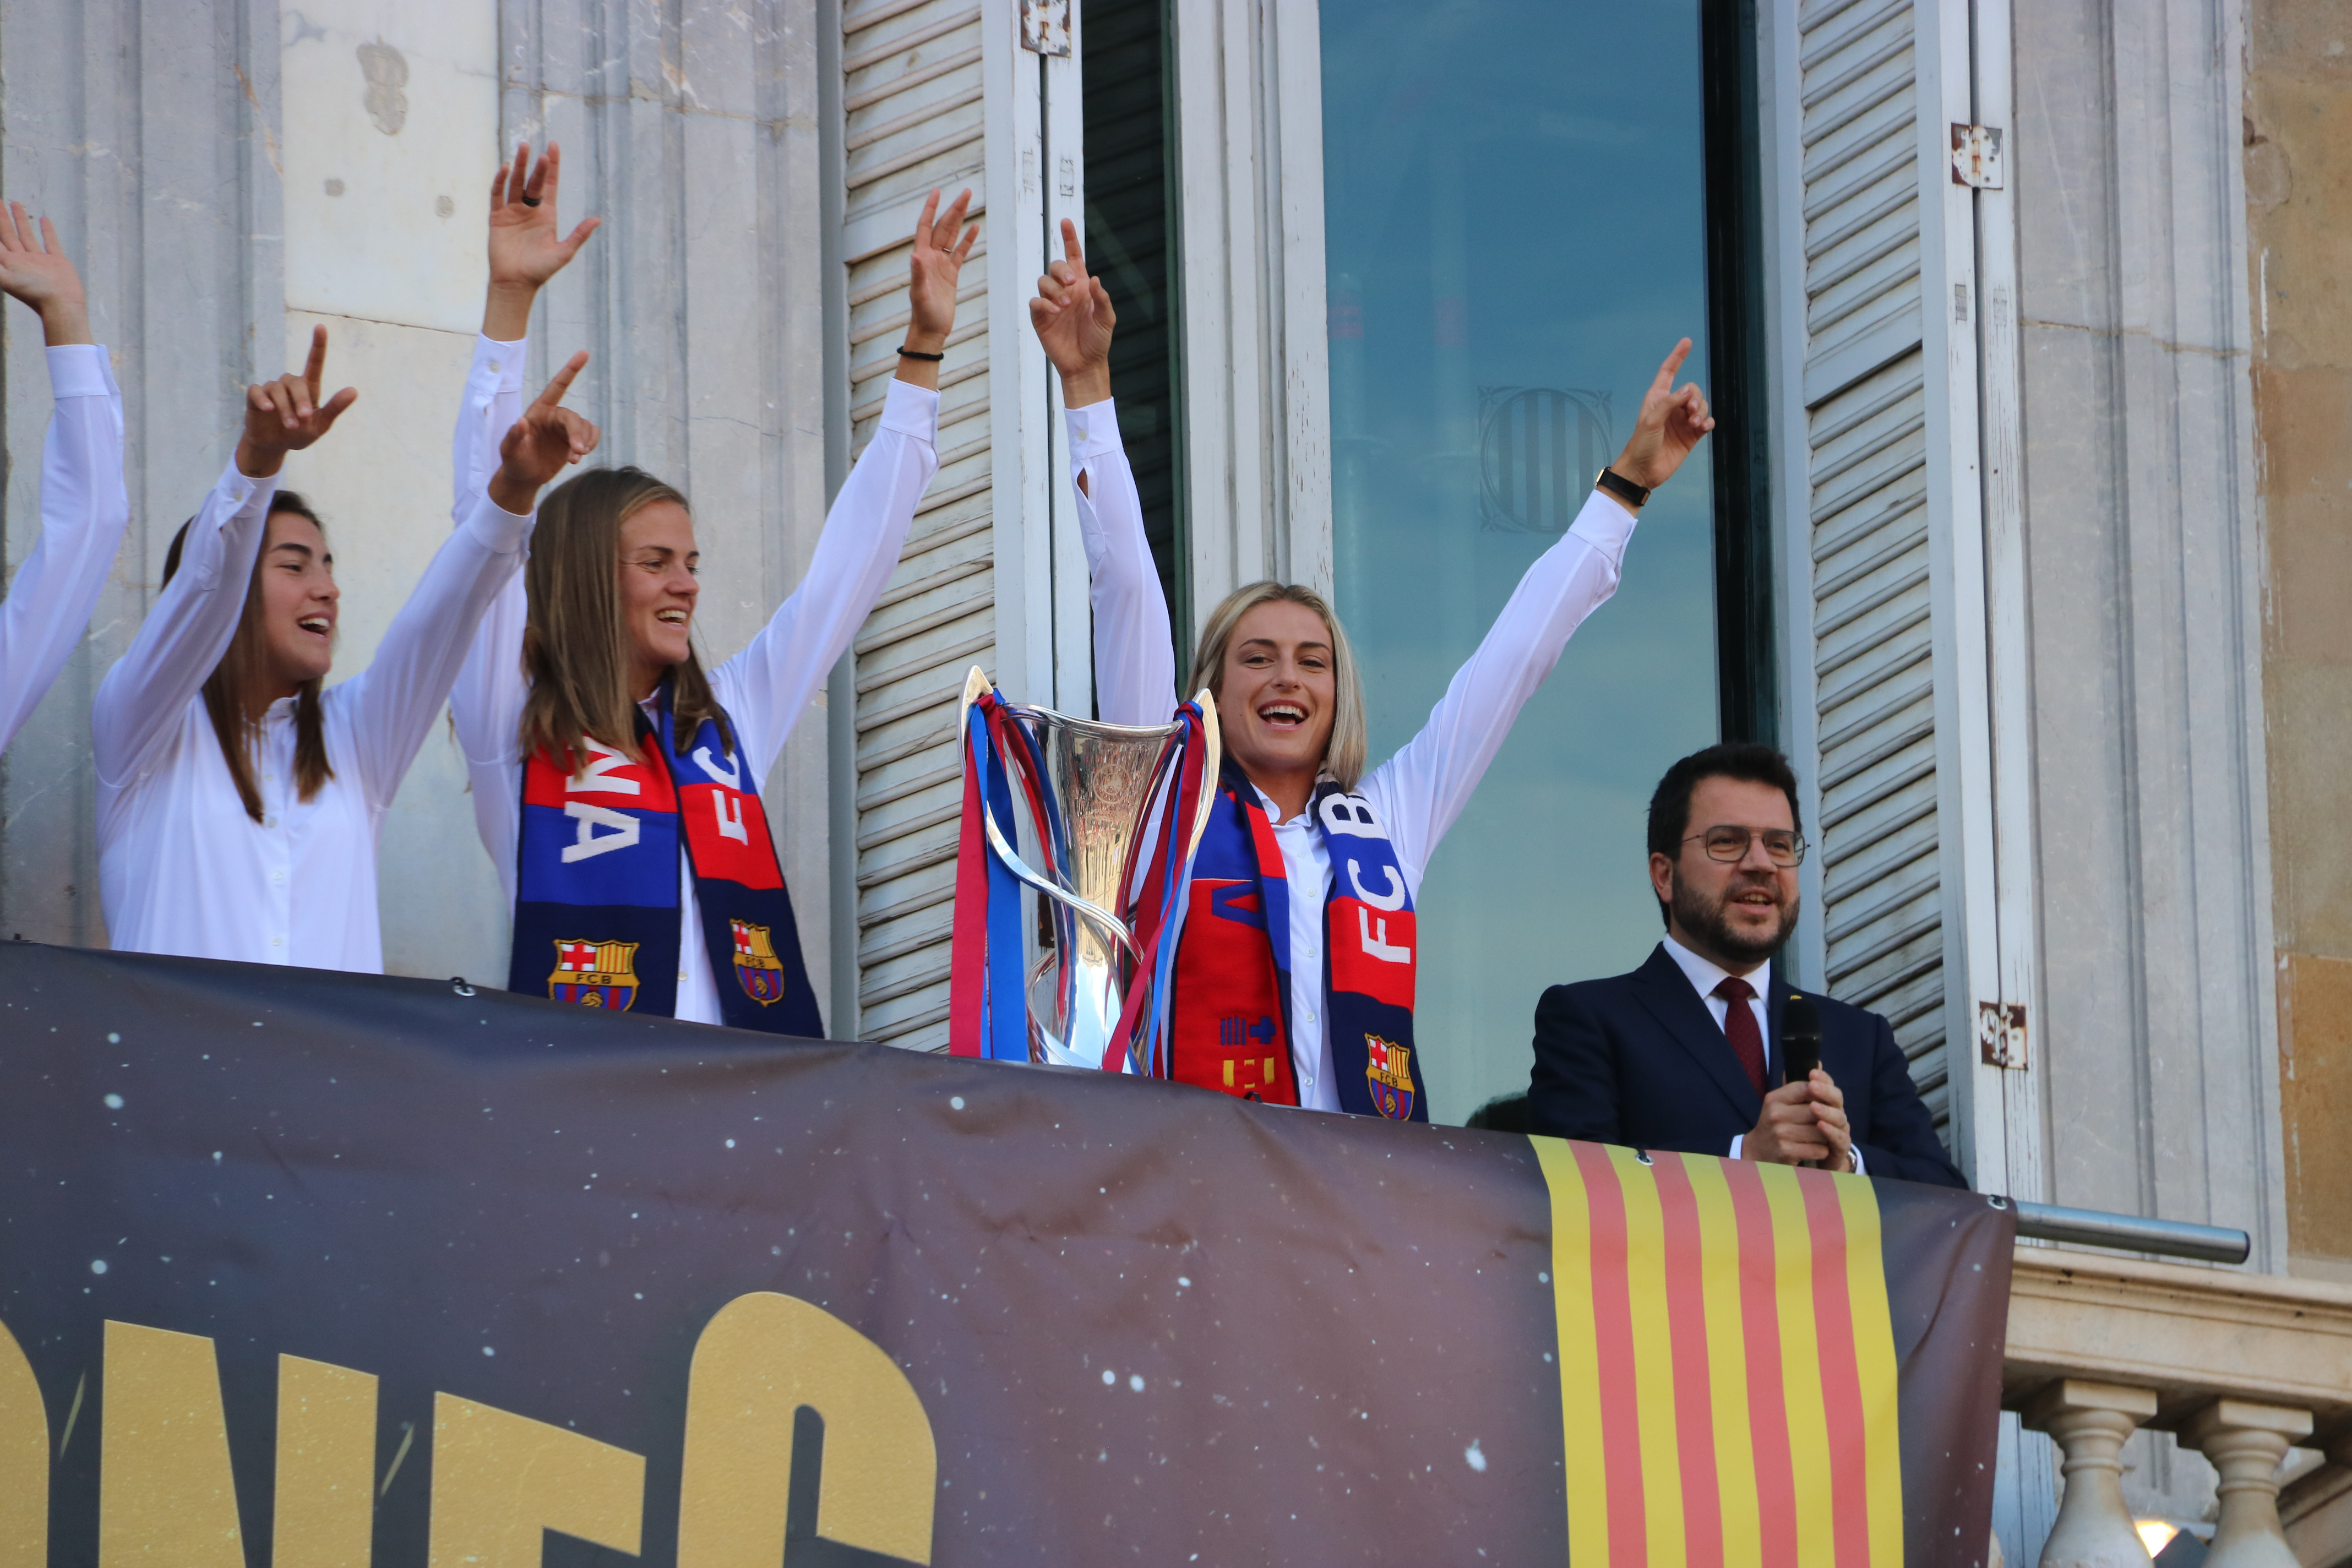 FC Barcelona Women's team celebrates the winning of the second Champions League trophy on June 4, 2023